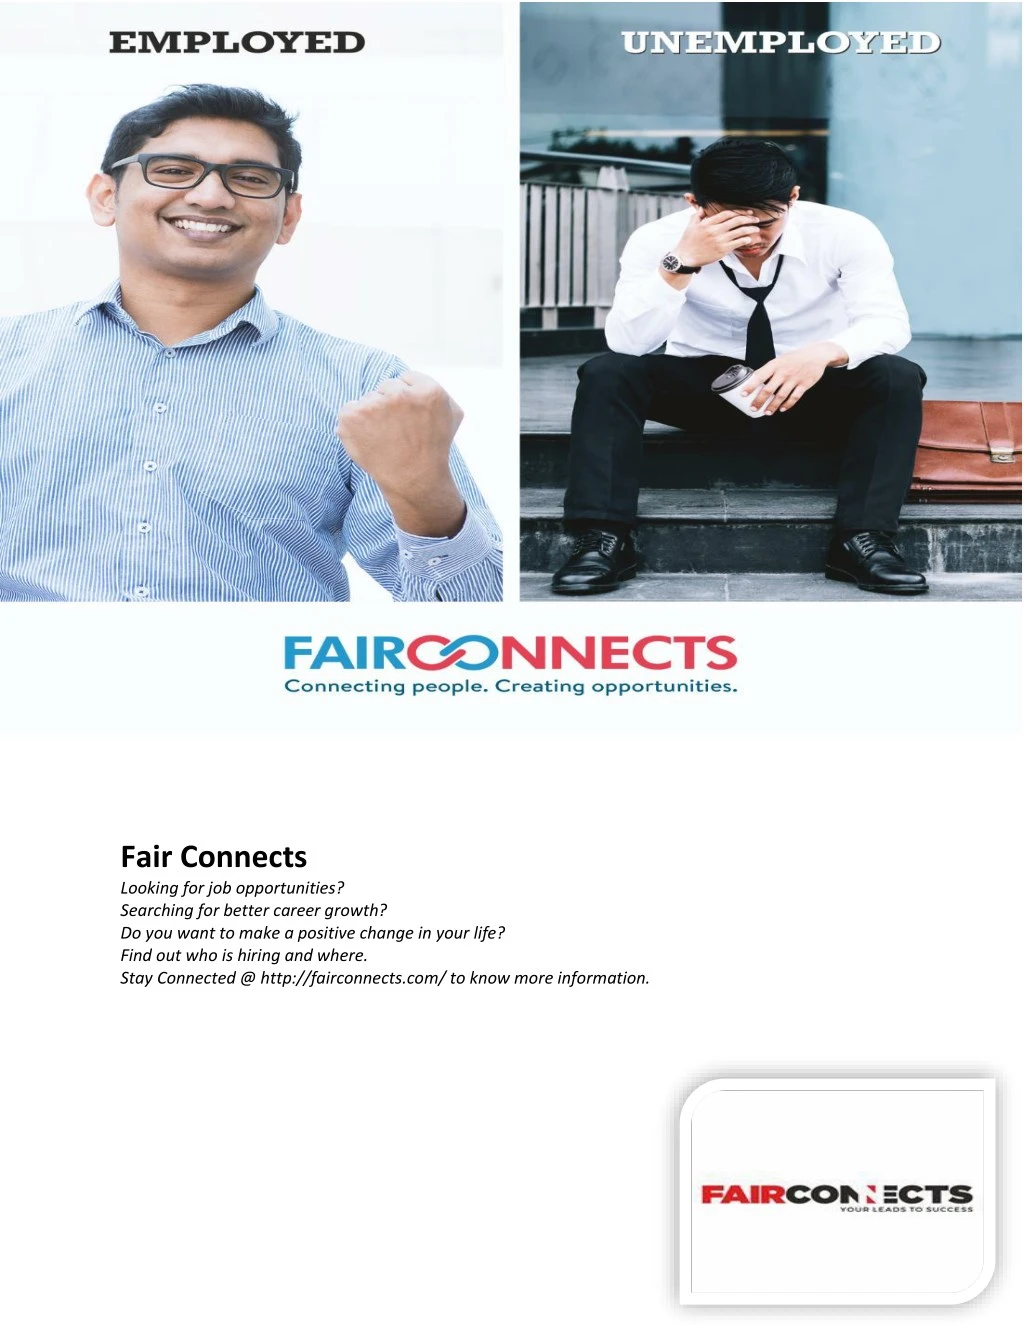 fair connects looking for job opportunities